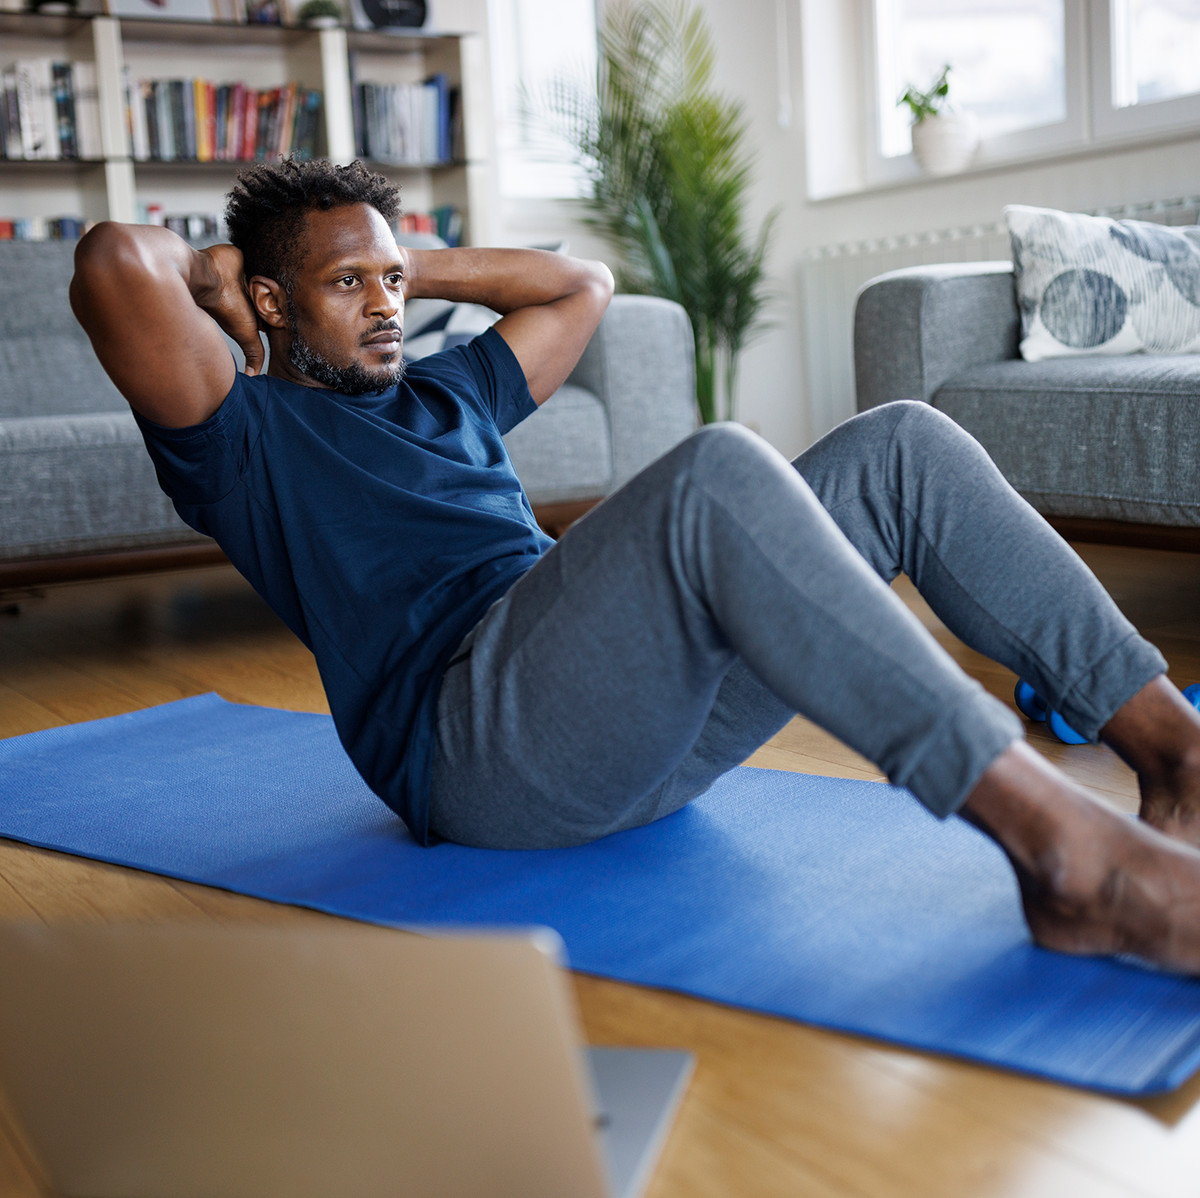 The Best Home Workouts To Get In Shape